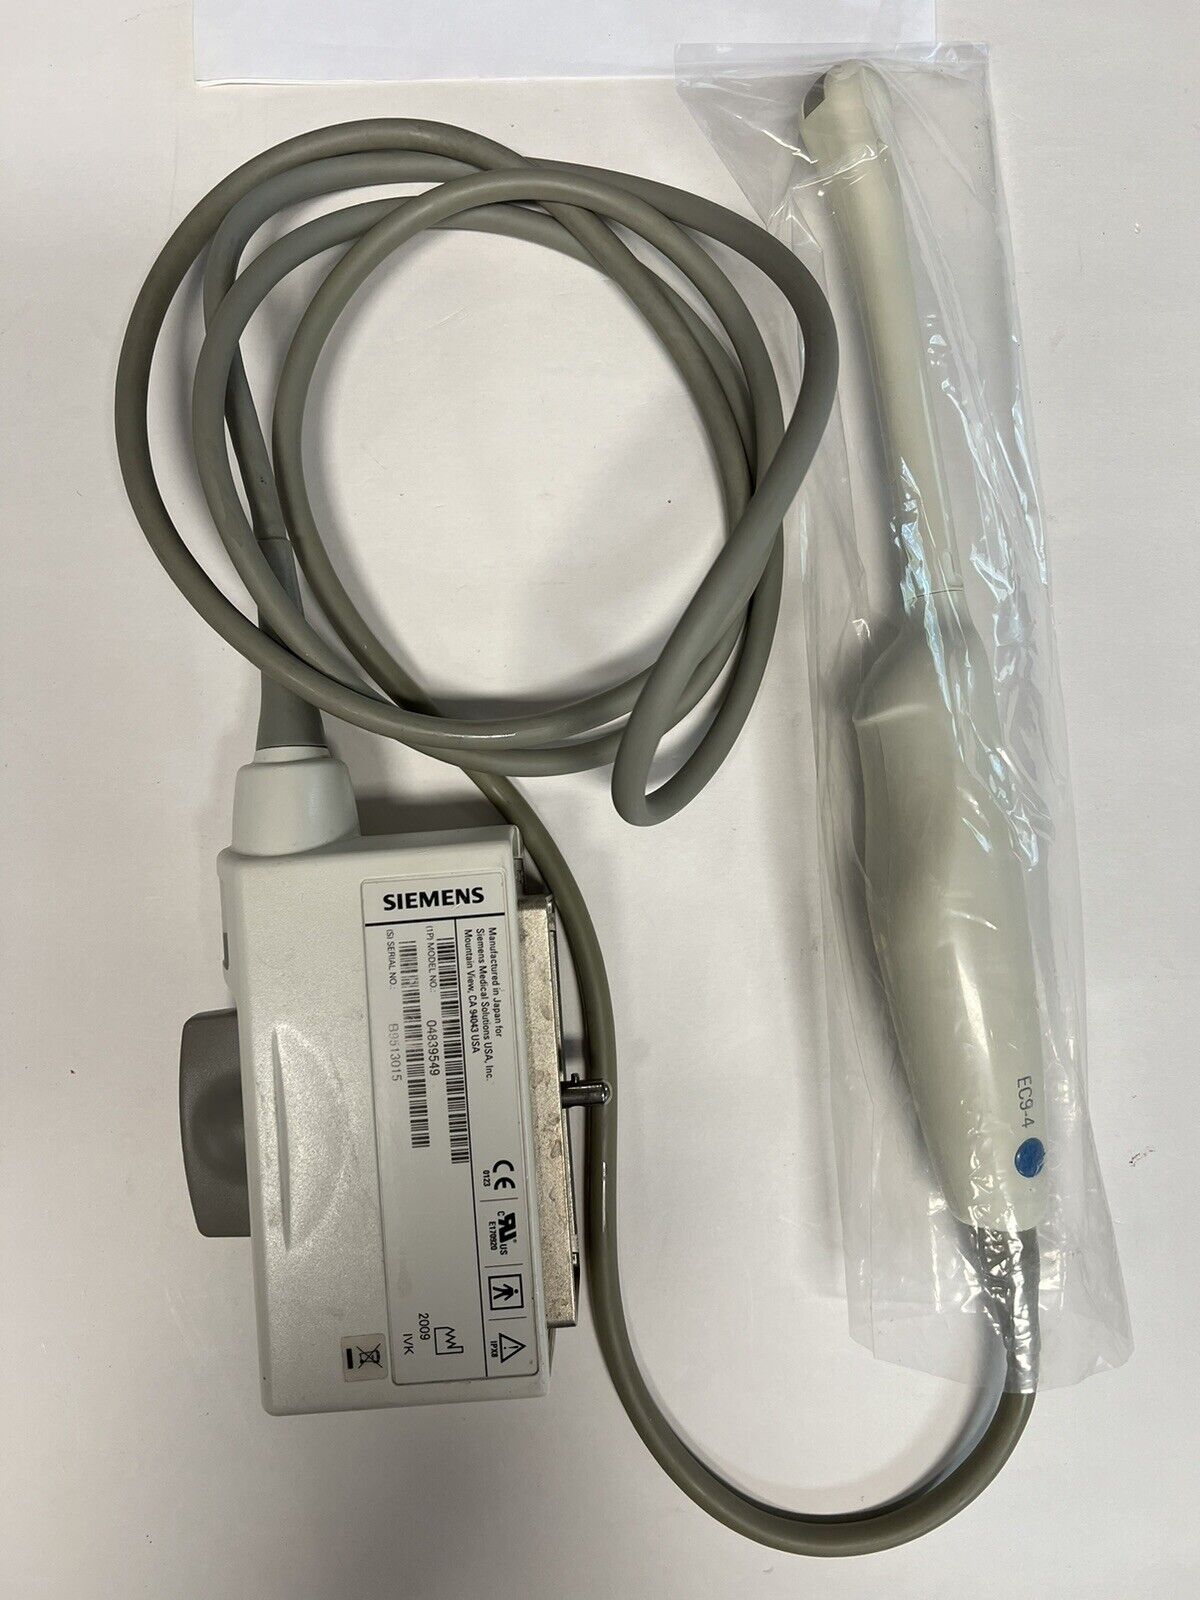 Siemens EC9-4 Transvaginal Ultrasound Transducer Probe~UNTESTED~For Parts